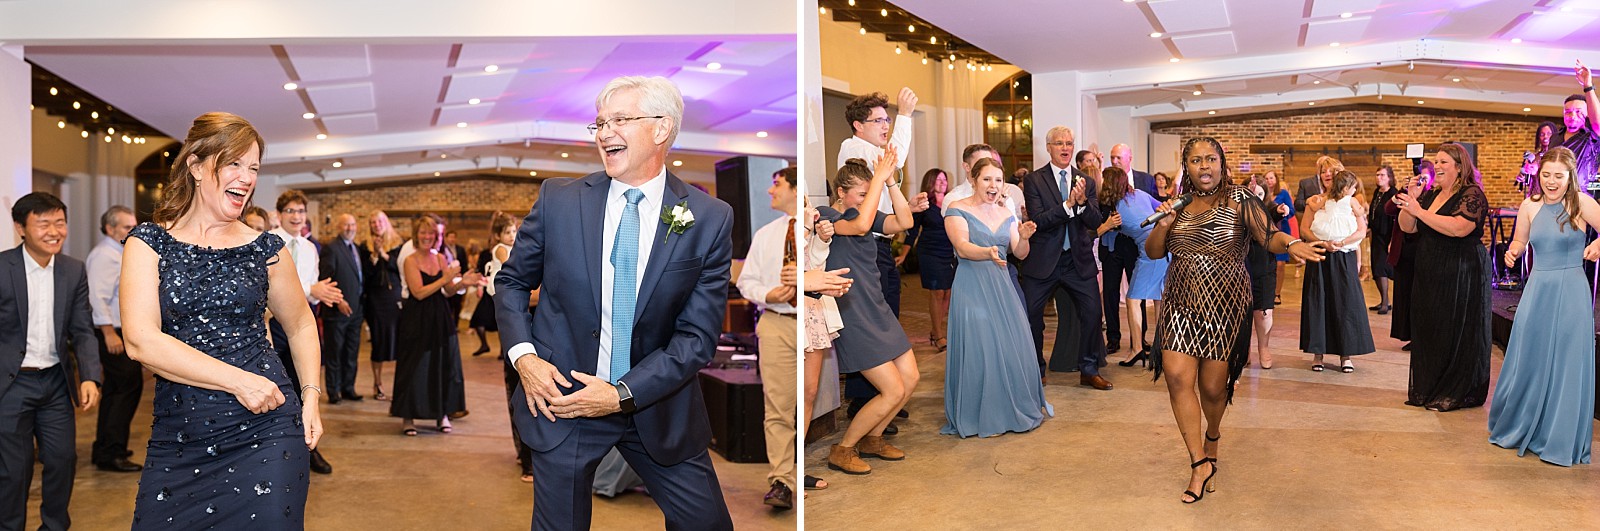 Brides parents dancing  | The Meadows in Raleigh | Raleigh NC Wedding Photographer